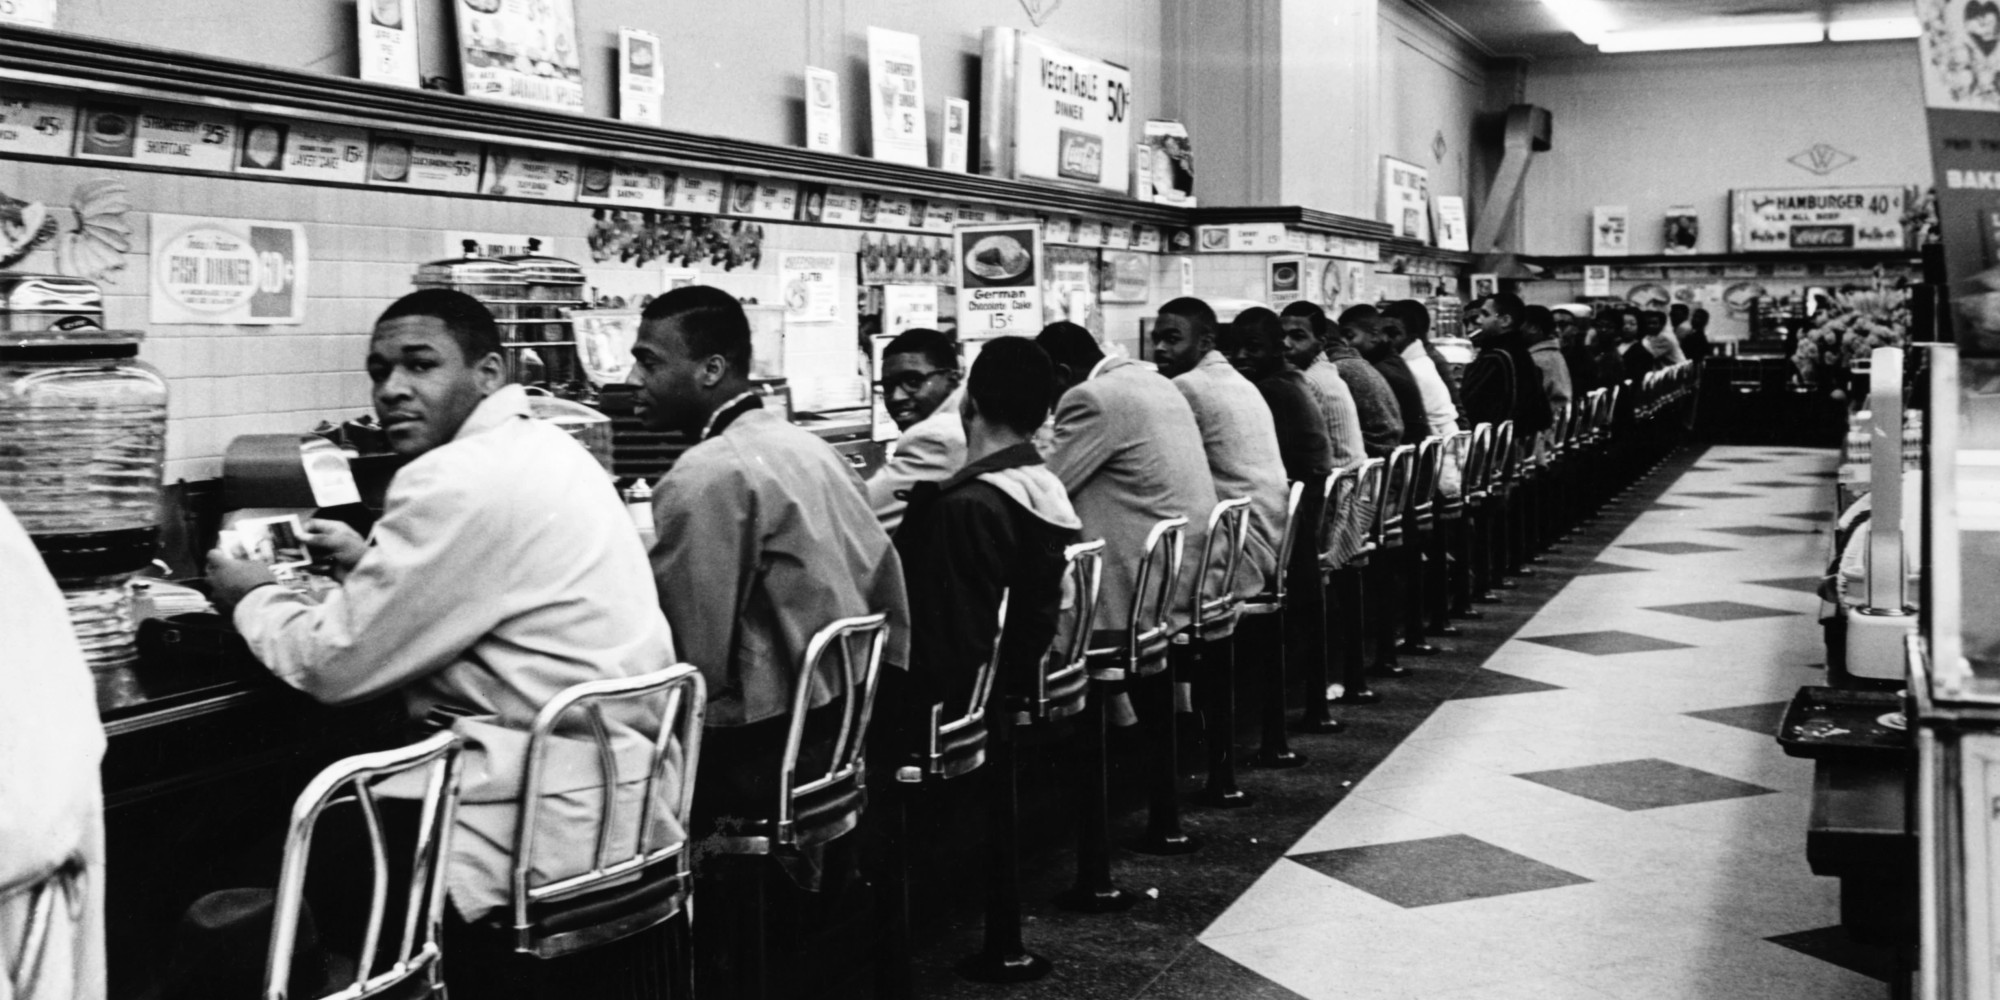 South Carolina Court Clears 'Friendship Nine' Of Civil Rights Crimes 54 Years Later ...